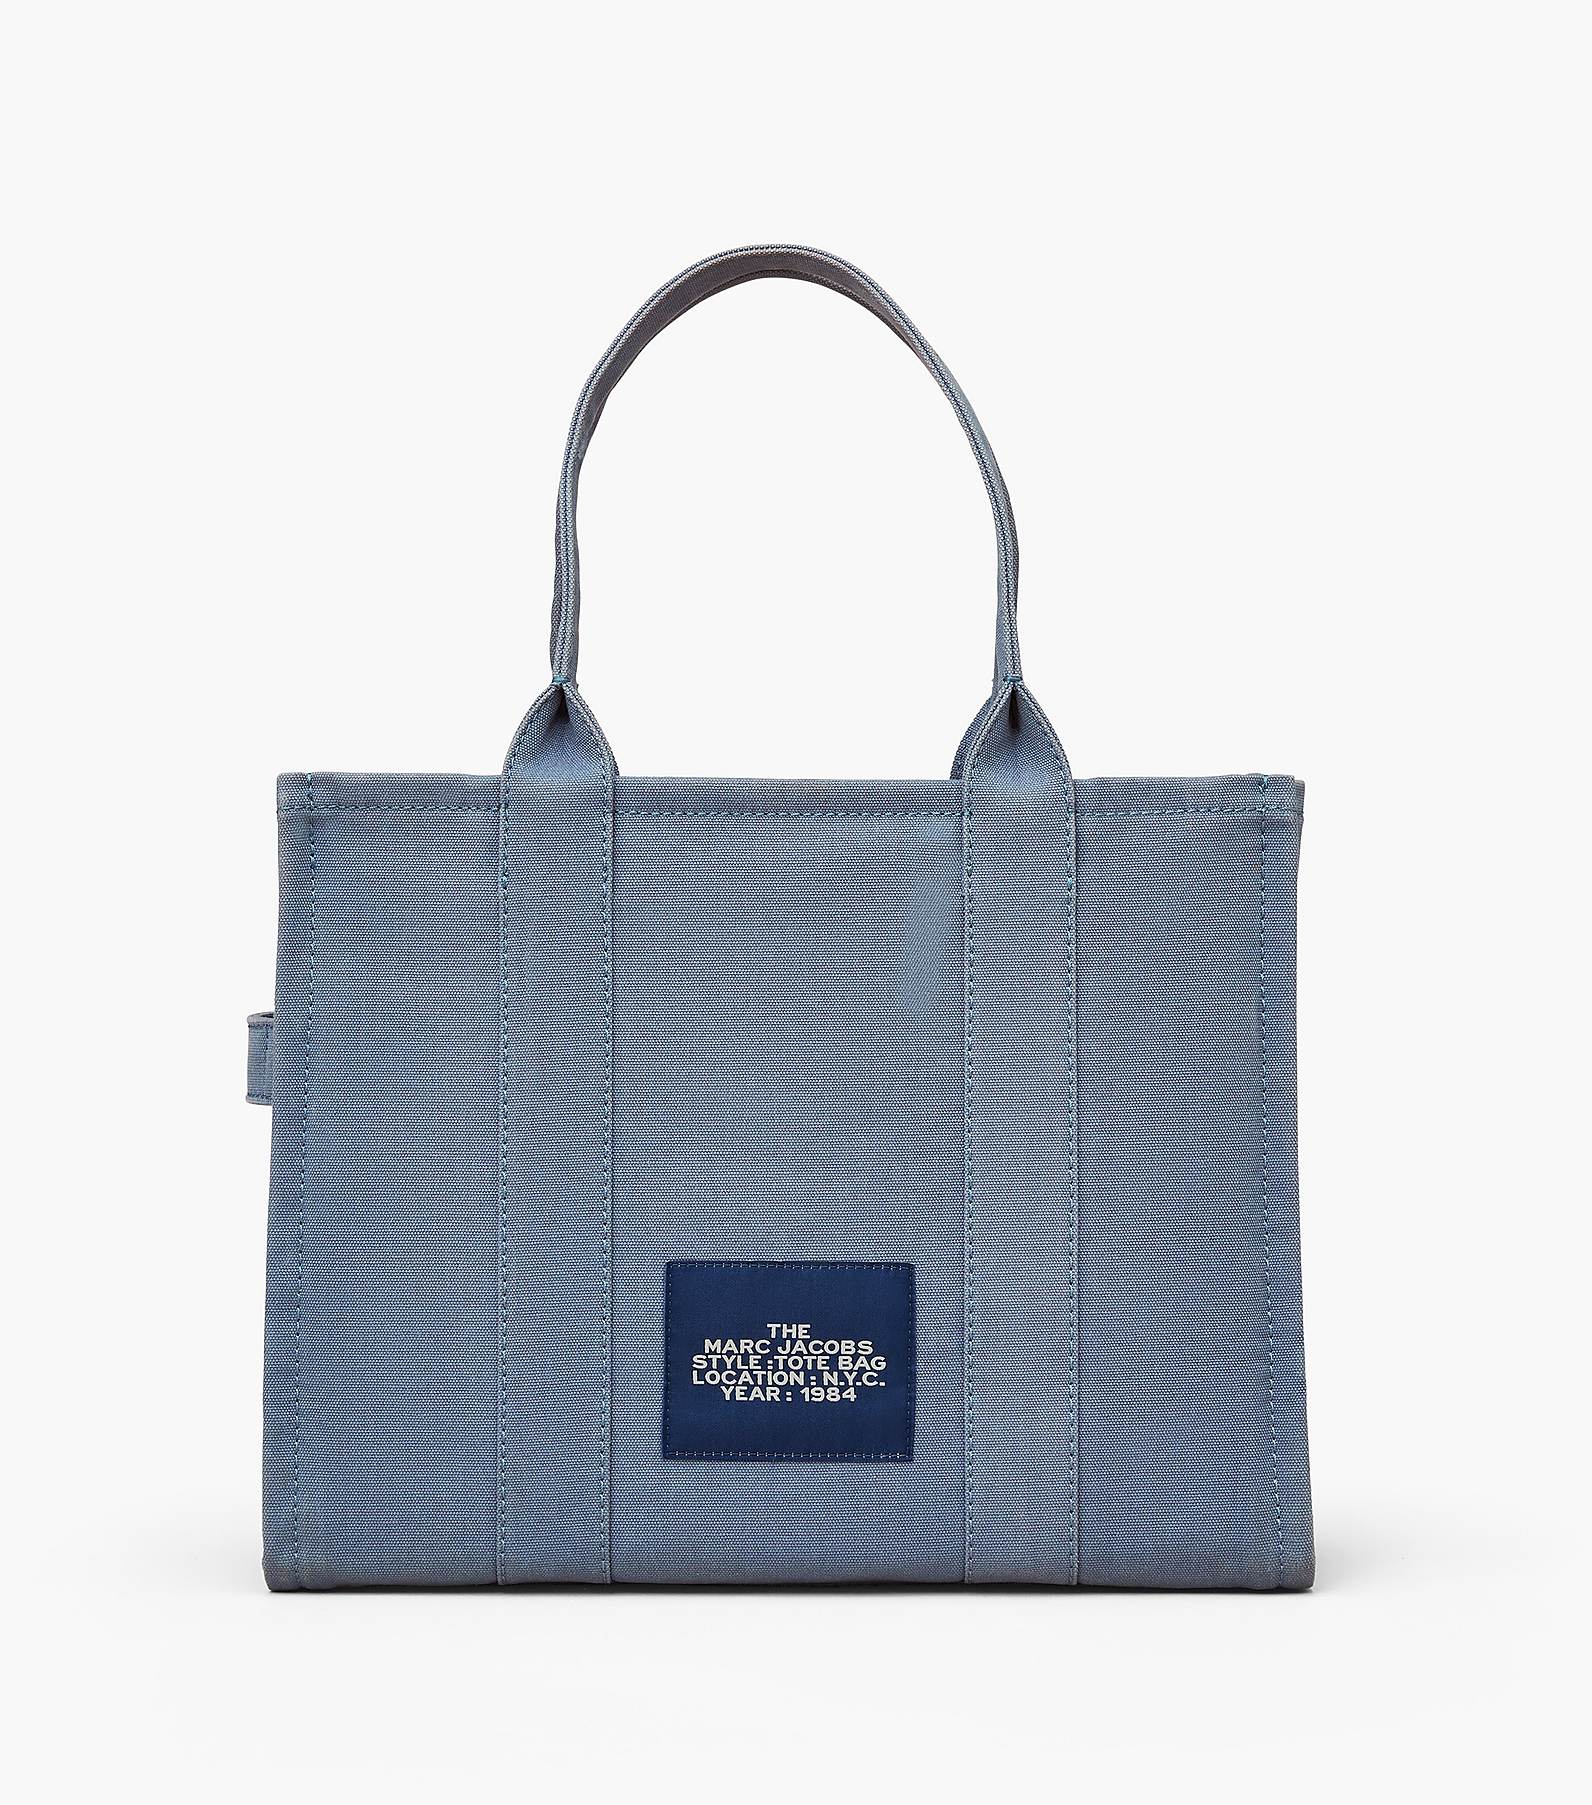 MARCJACOBSMARC JACOBS 新品♡ トートバッグ DISC LOGO TOTE A4